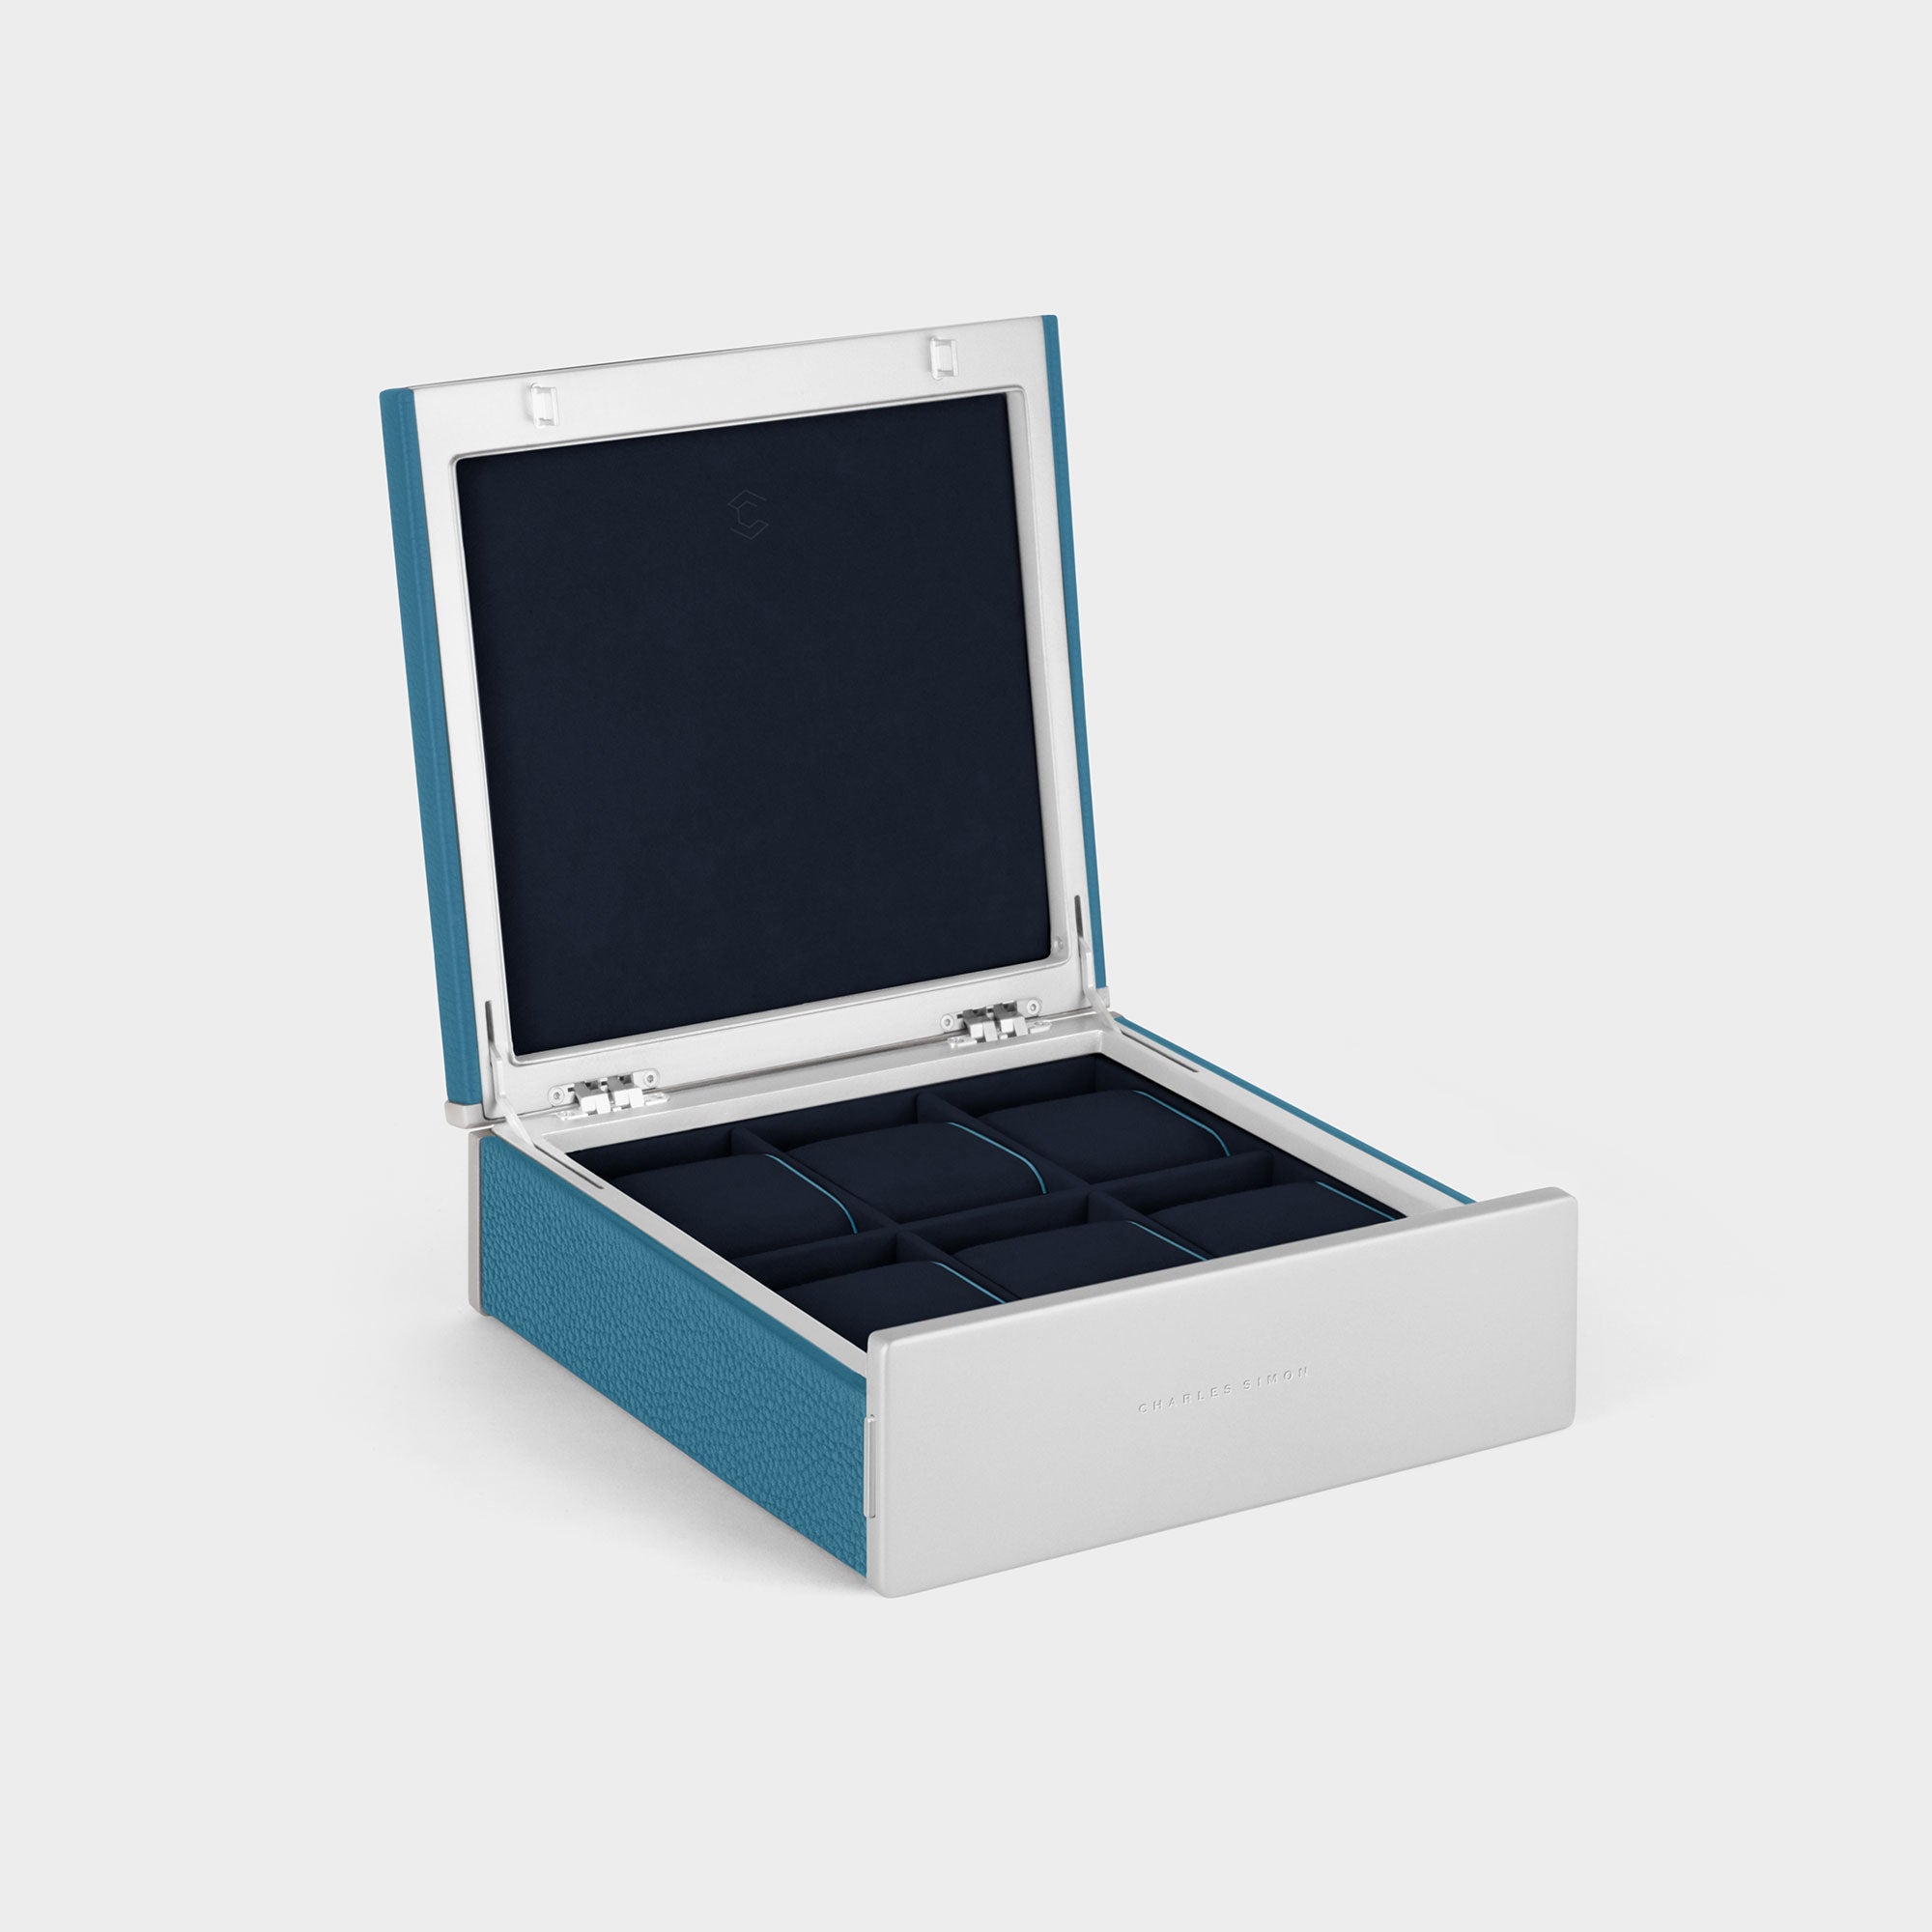 Handmade watch box for 6 watches in sky blue leather, carbon fiber and anodized aluminum casing and deep blue Alcantara interior